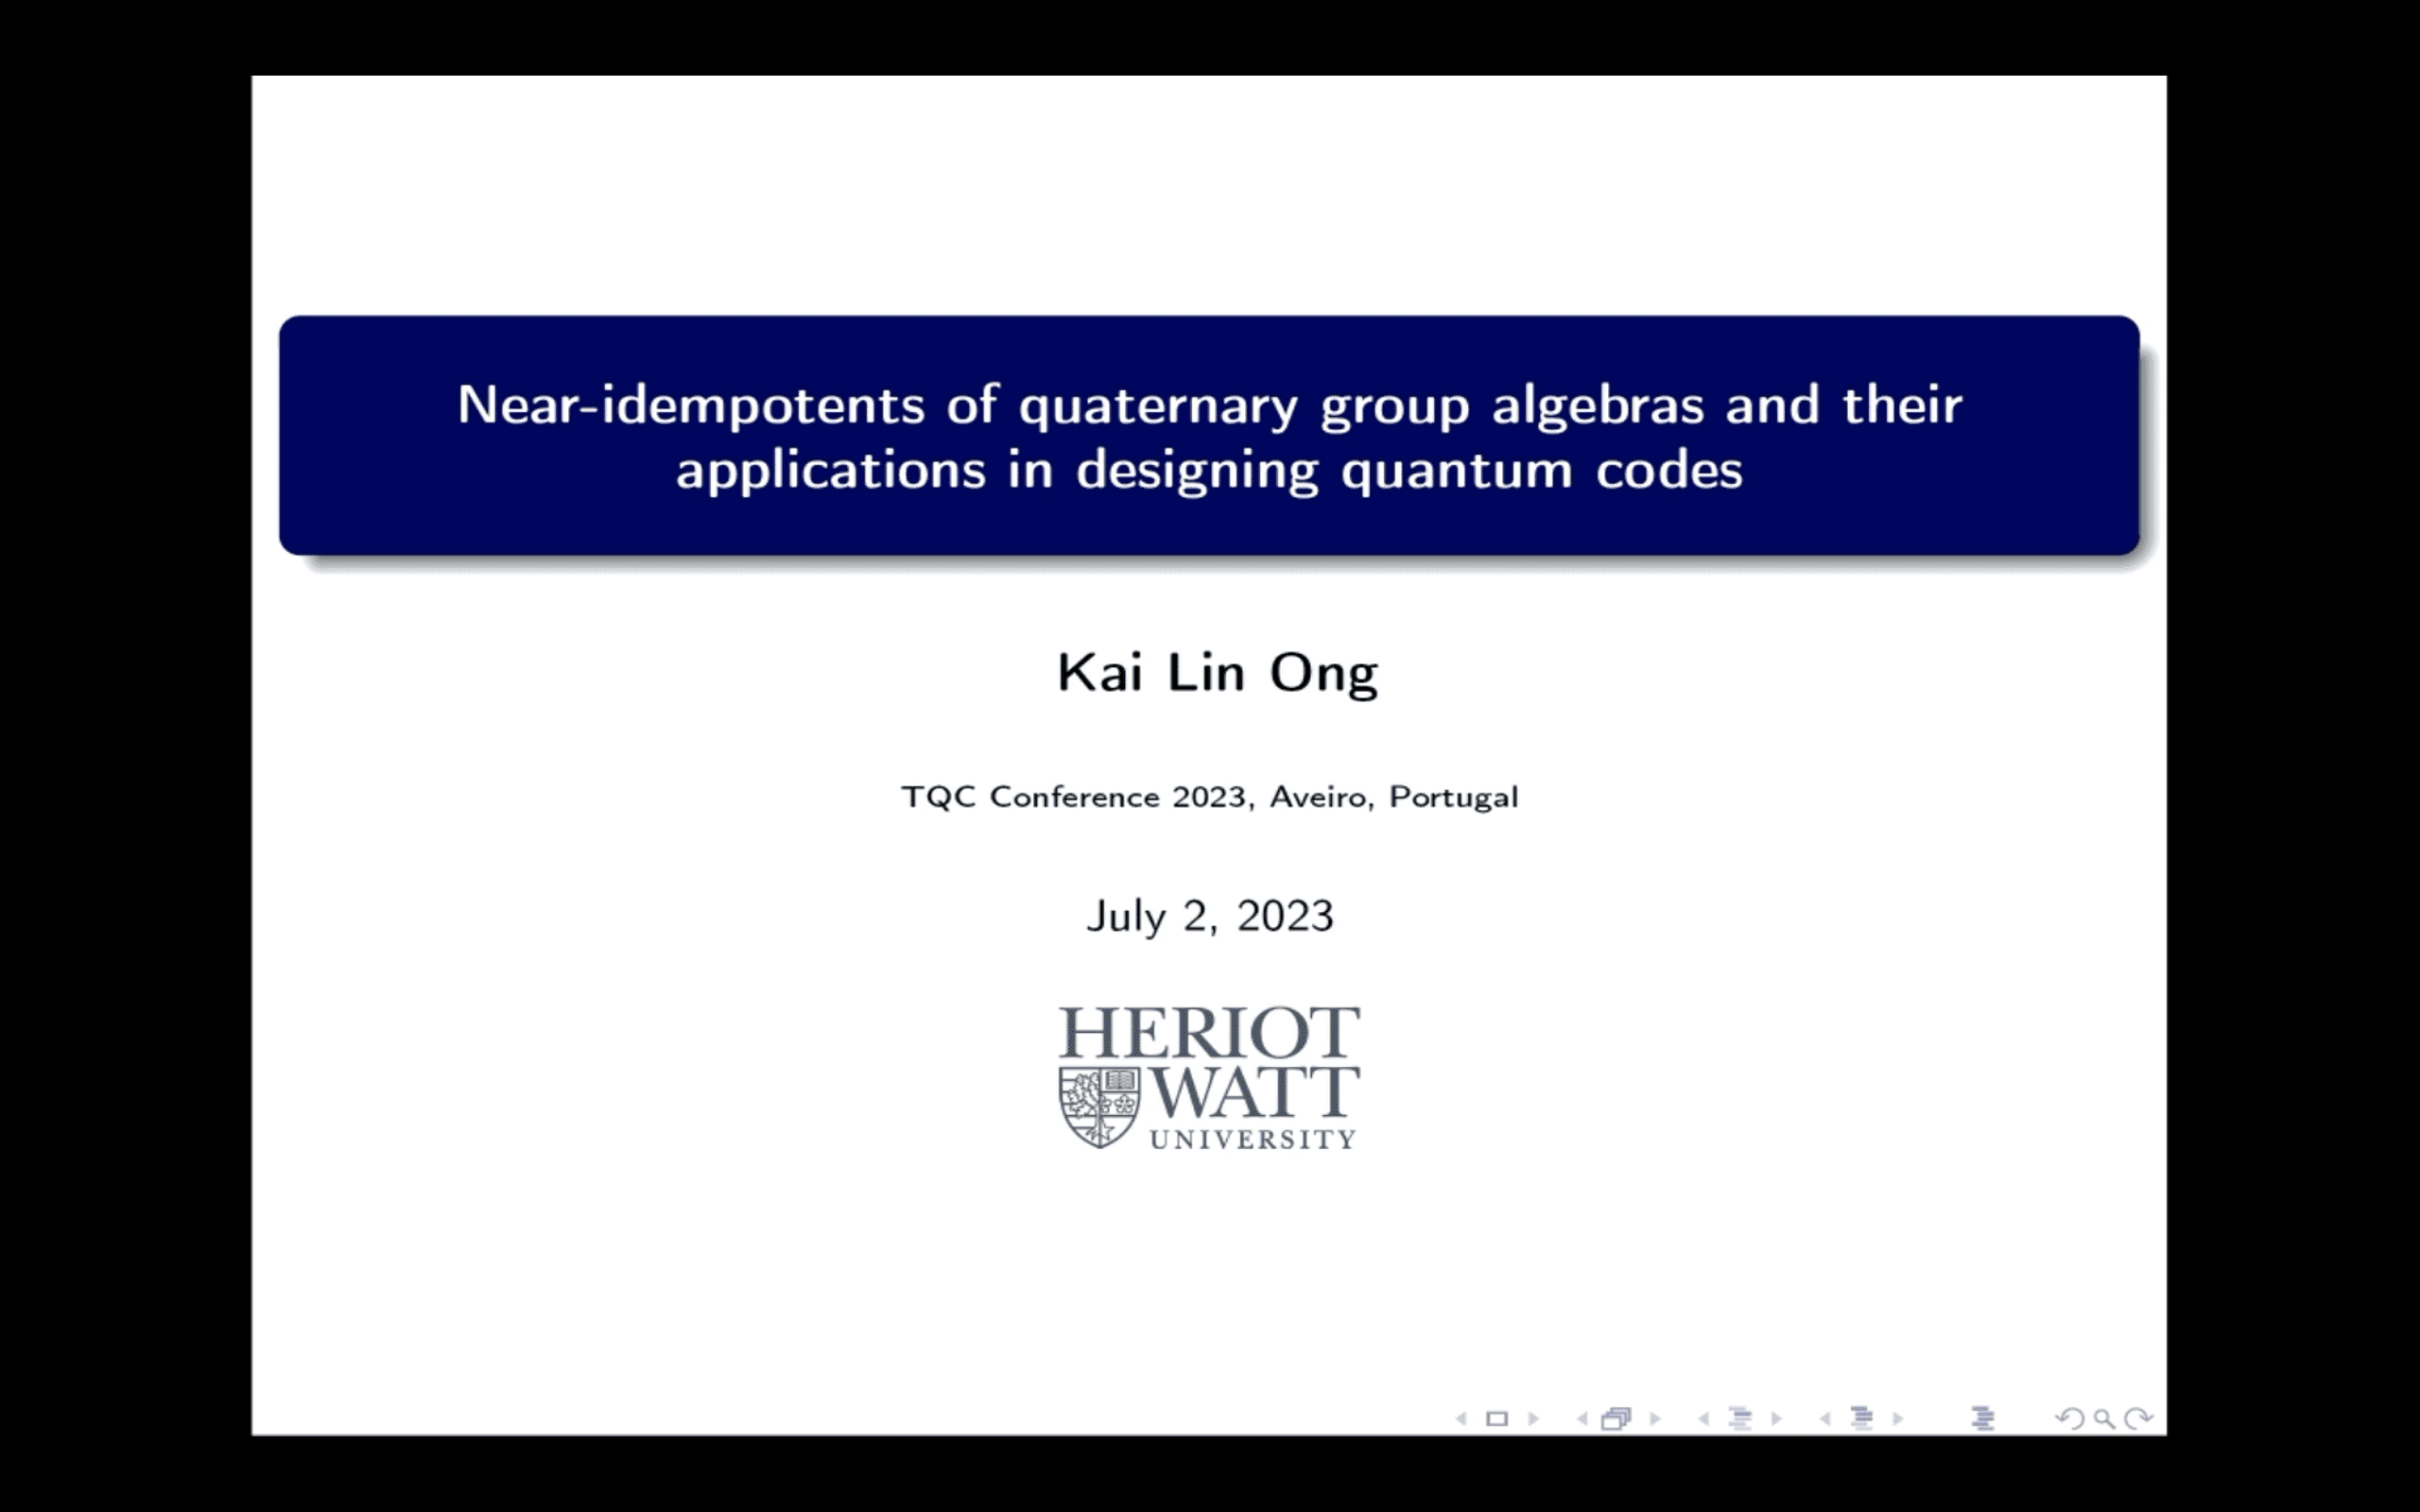 Near-idempotents of quaternary group algebras and their applications in designing quantum code